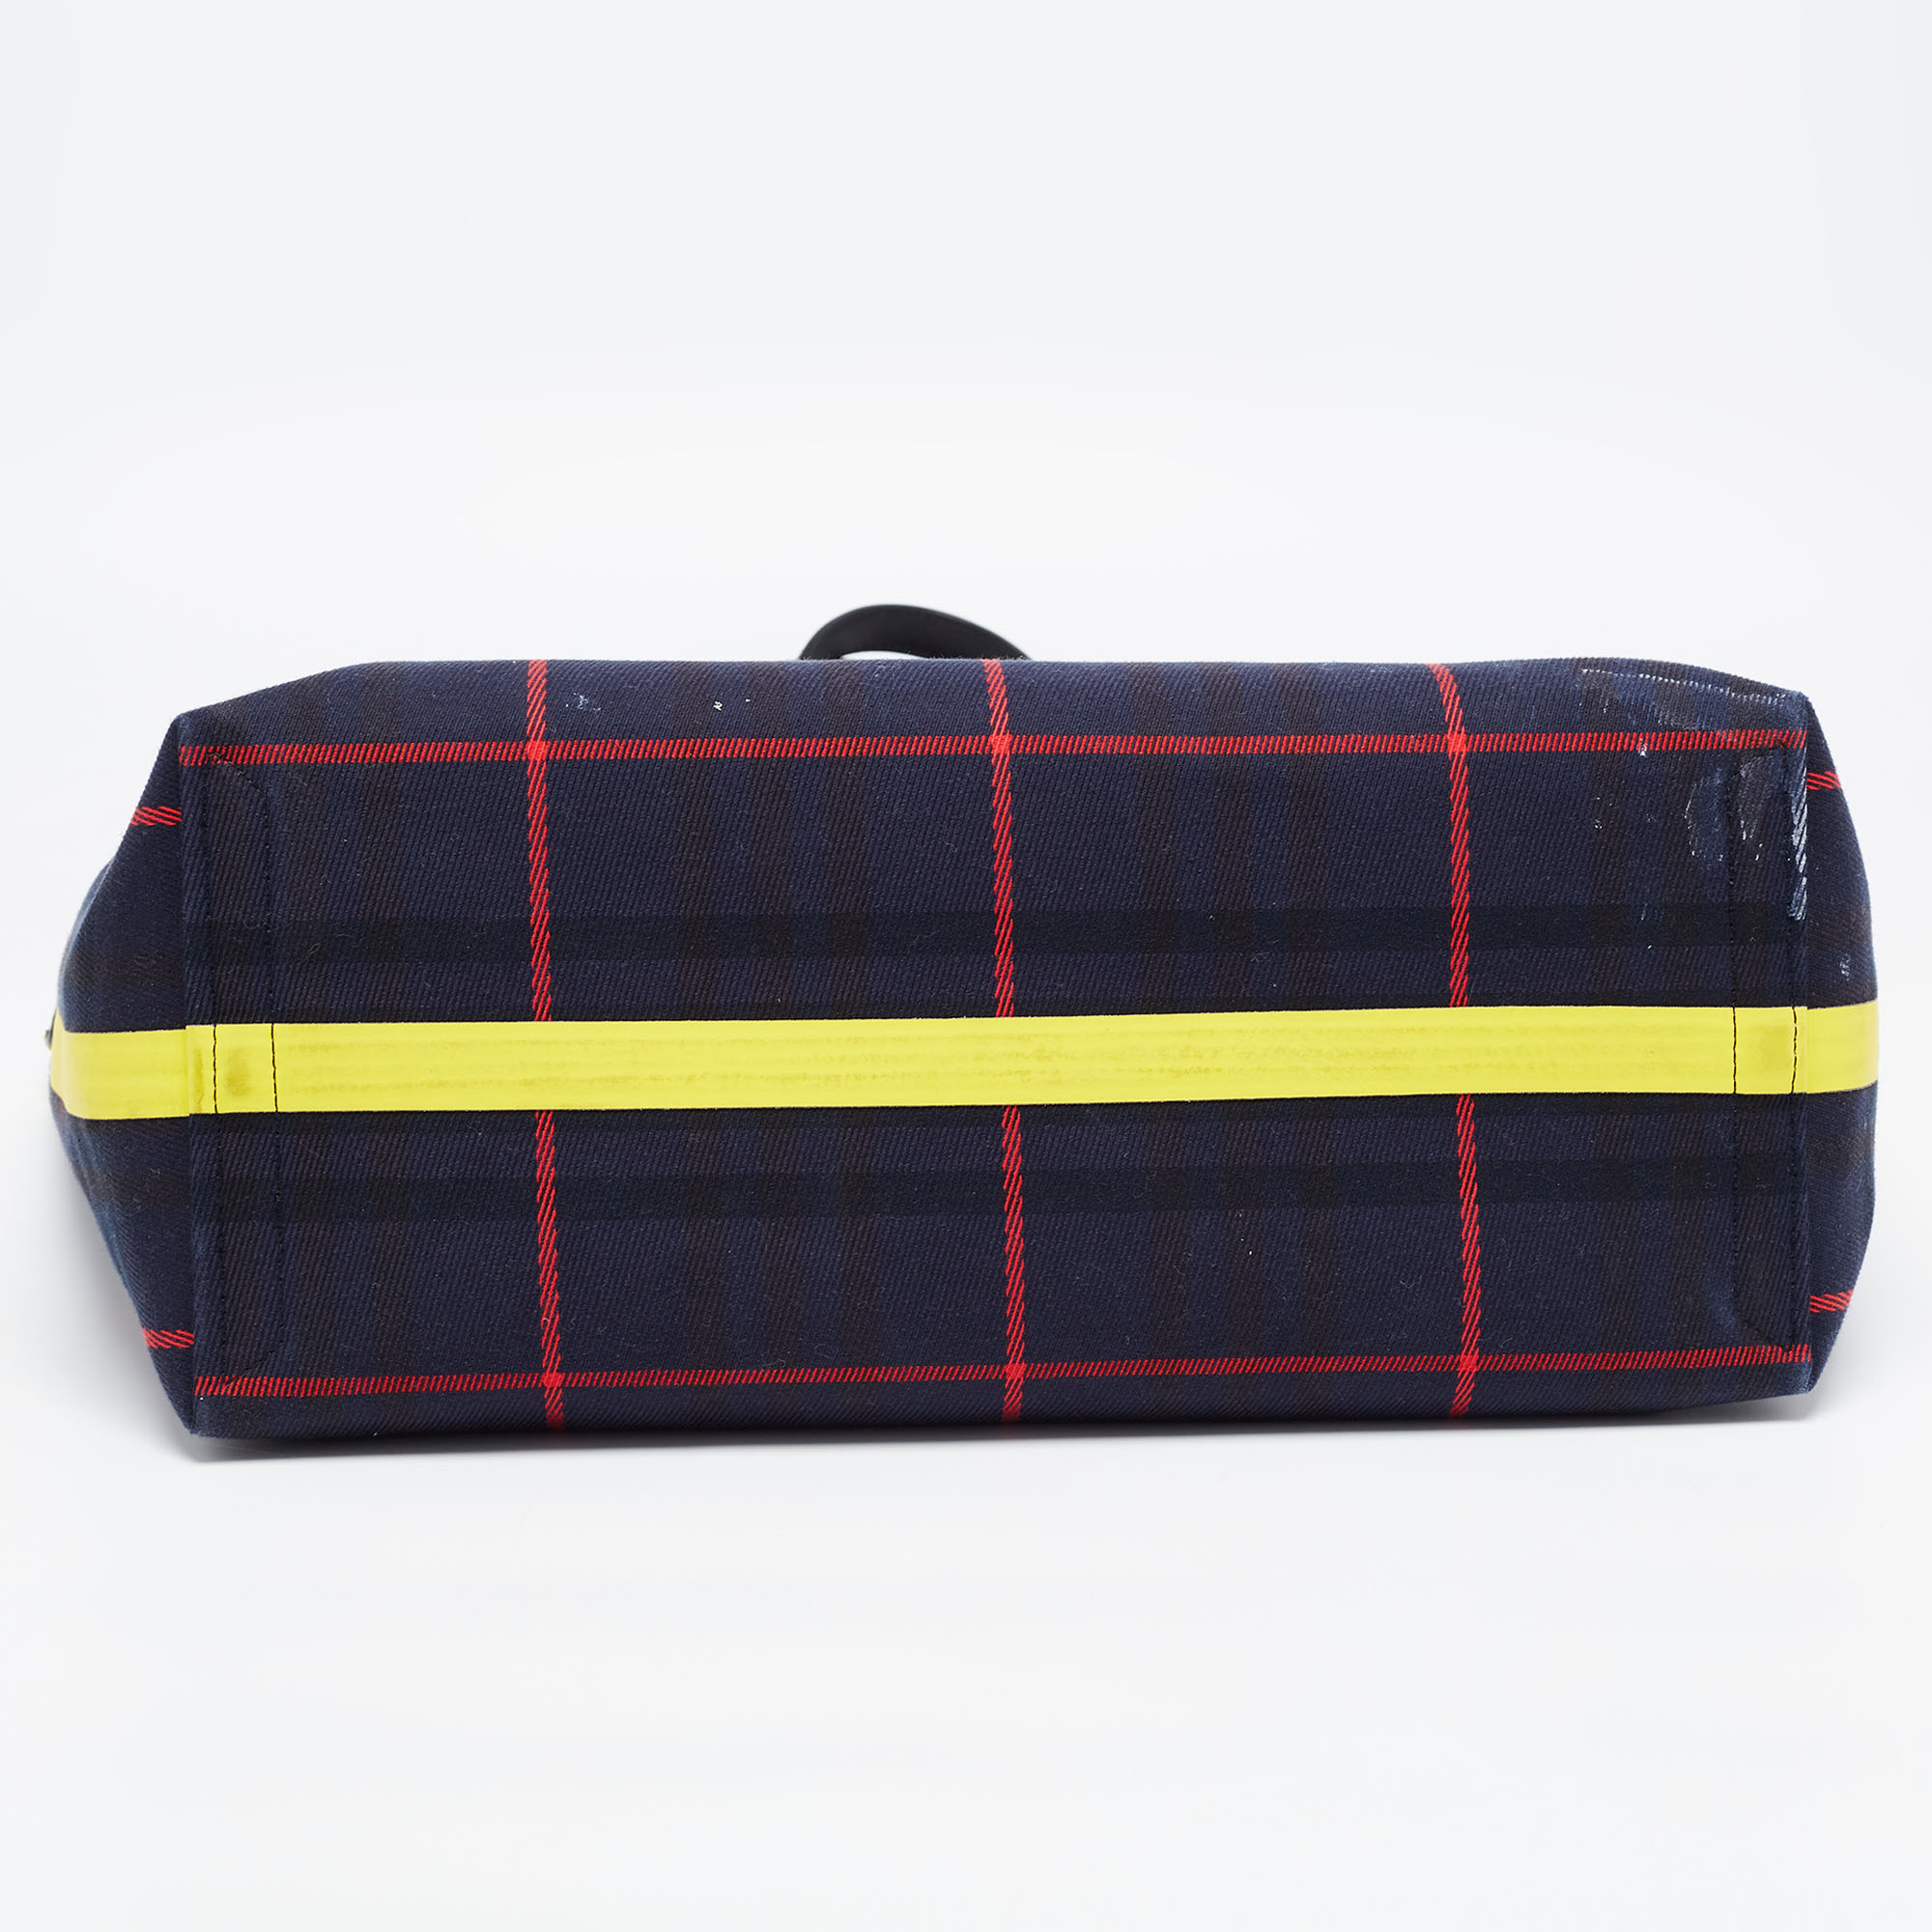 Burberry Dark Blue/Red Check Canvas Medium Reversible Giant Tote